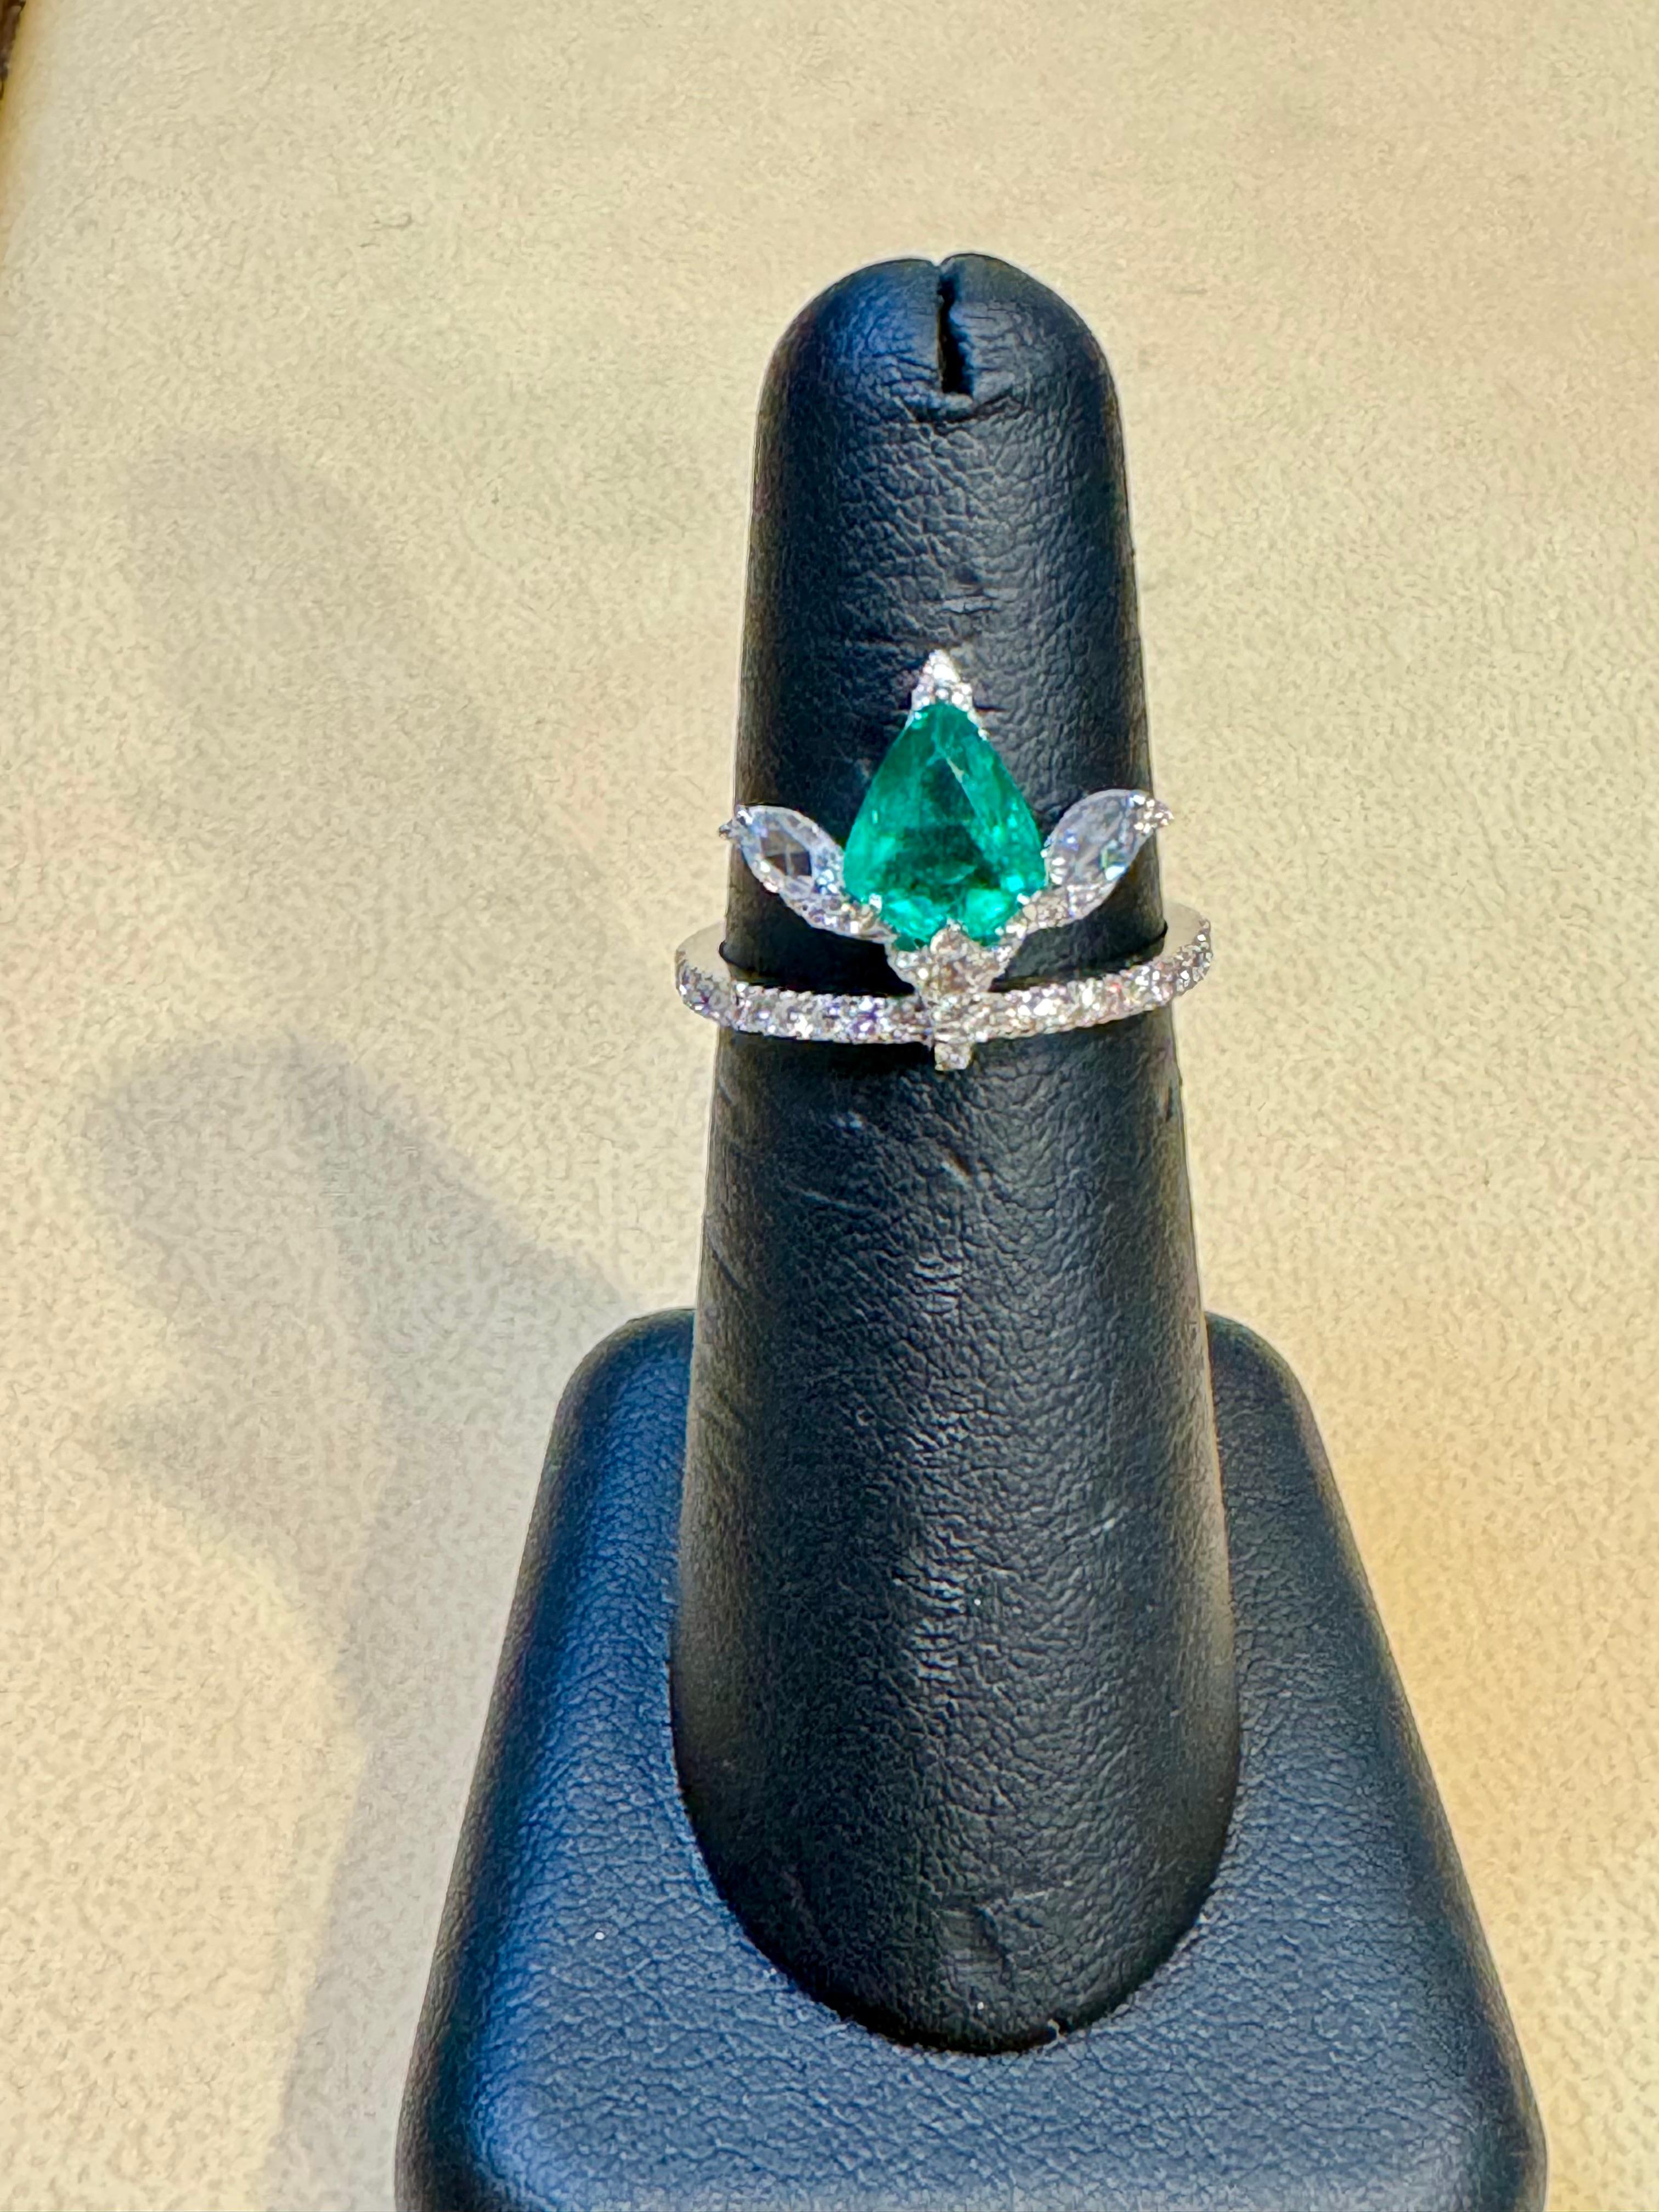 1.2 Ct Finest Zambian Pear Emerald & 1 Ct Diamond Ring in 18 Kt Gold Size 6.5 For Sale 2